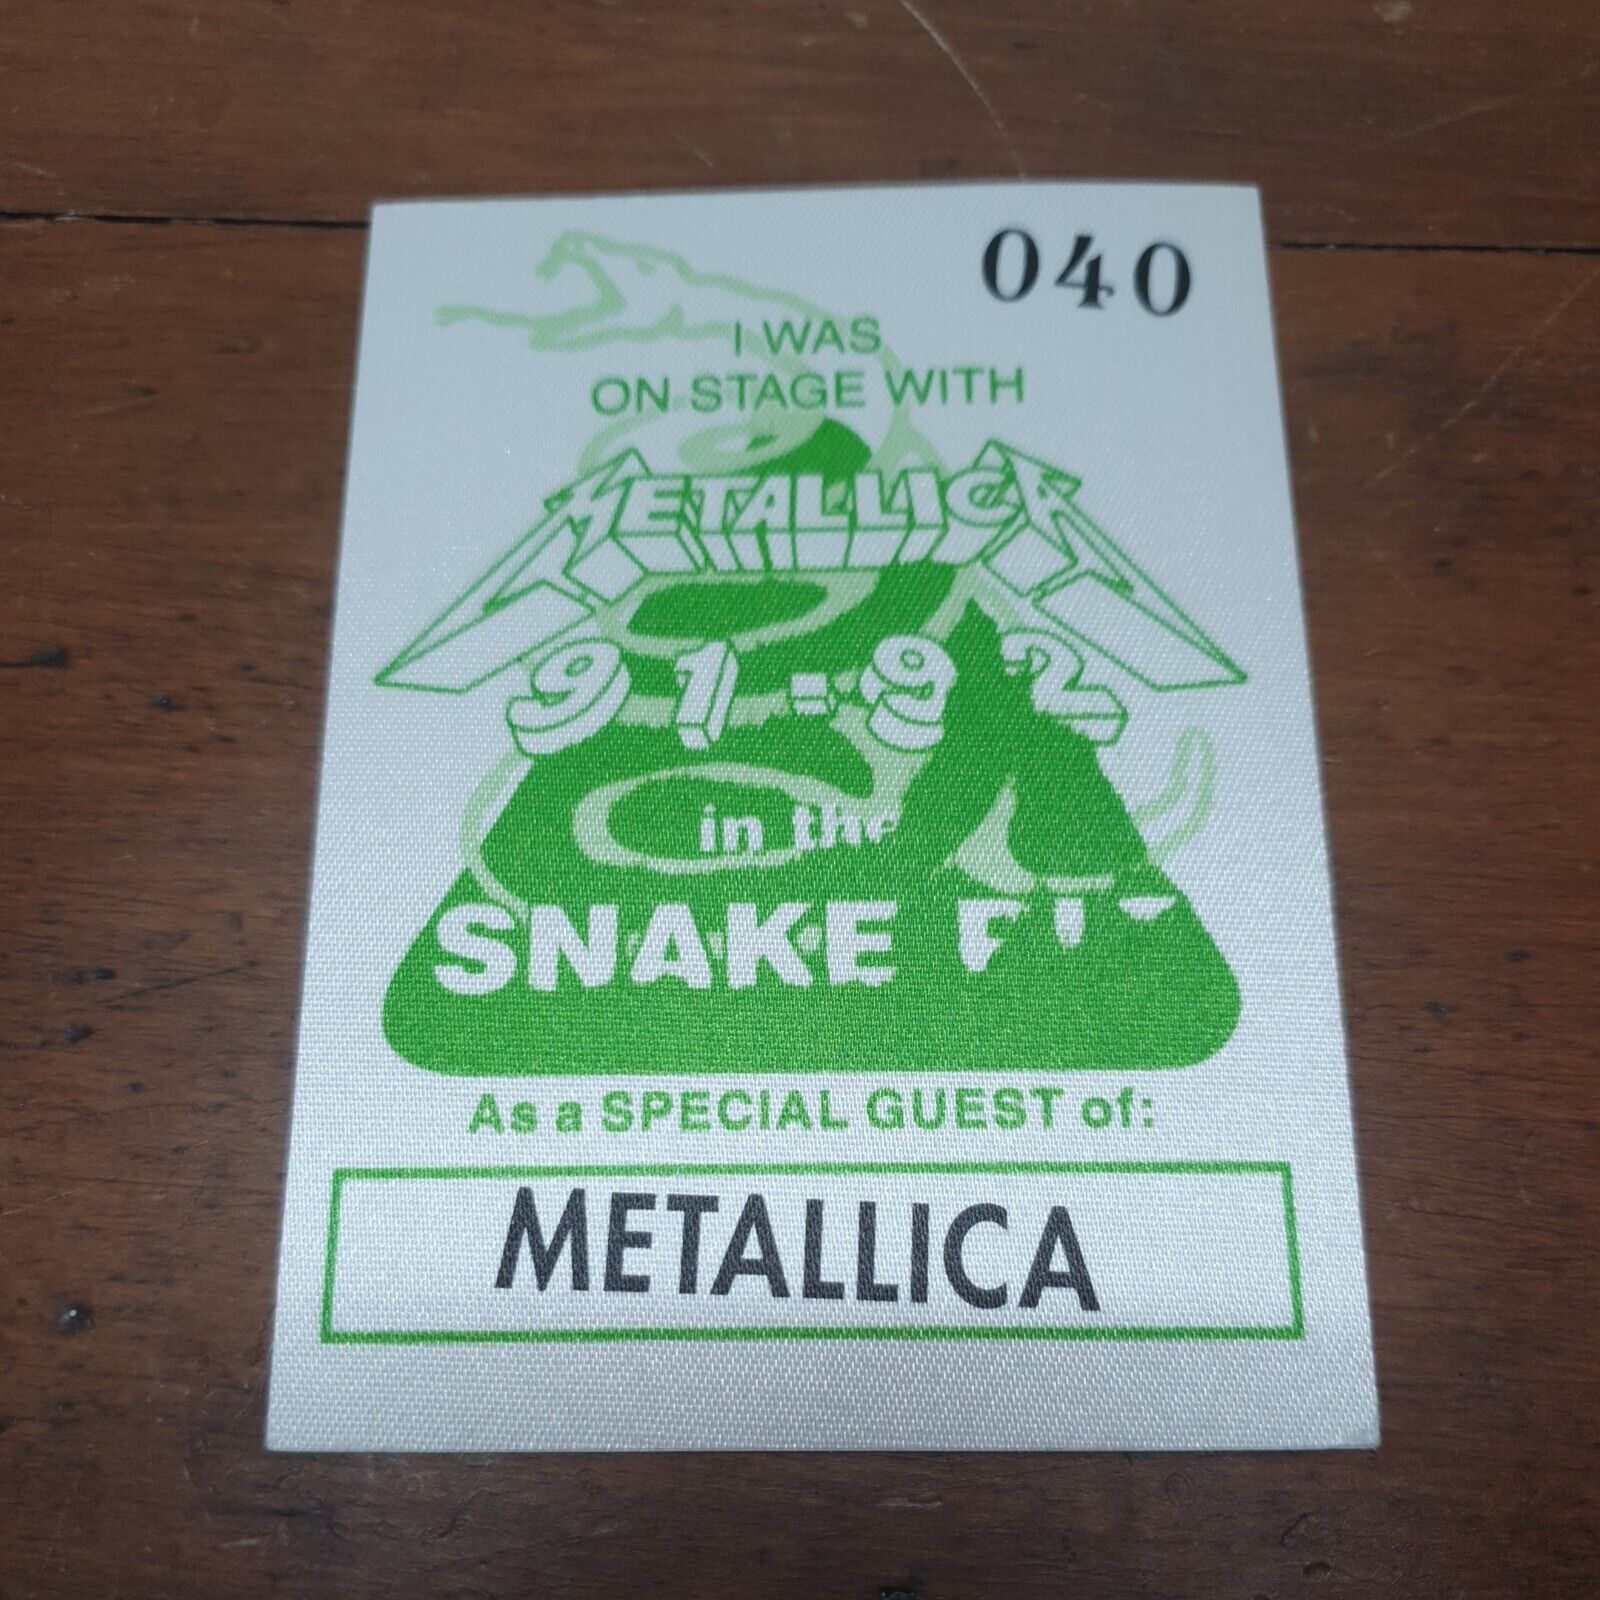  Genuine Vintage Metallica back stage pass patch  1991